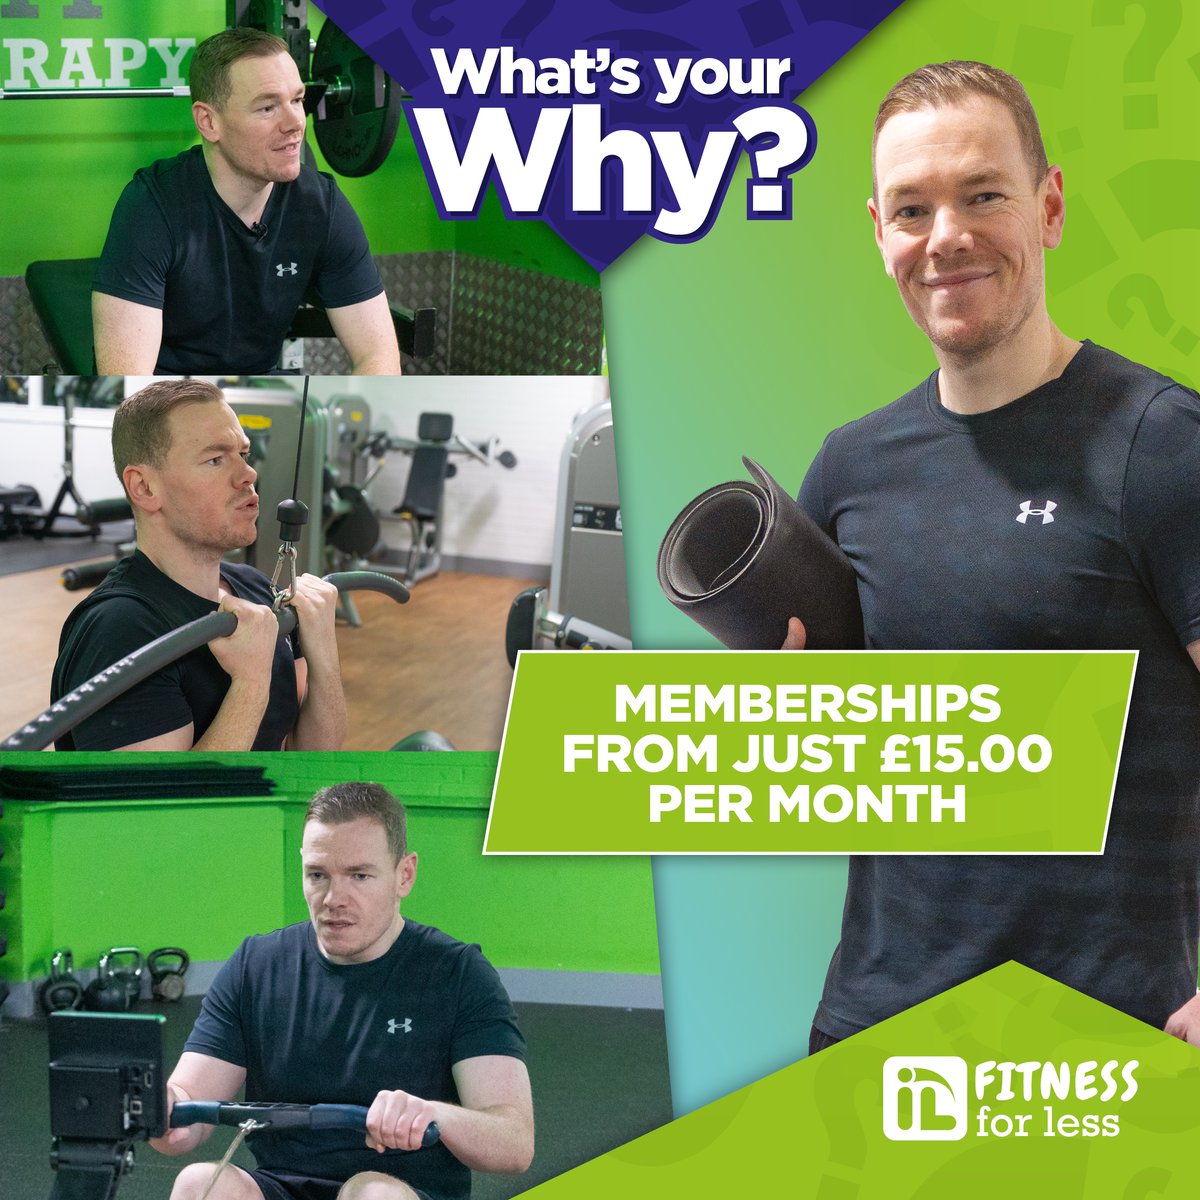 Fitness For Less is our affordable solution to wellbeing, offering state-of-the-art facilities at a price that doesn't break the bank. We're committed to making fitness accessible to everyone in our community. Memberships start from just £15 a month ⬇️ inverclydeleisure.com/gym/fitness-fo…